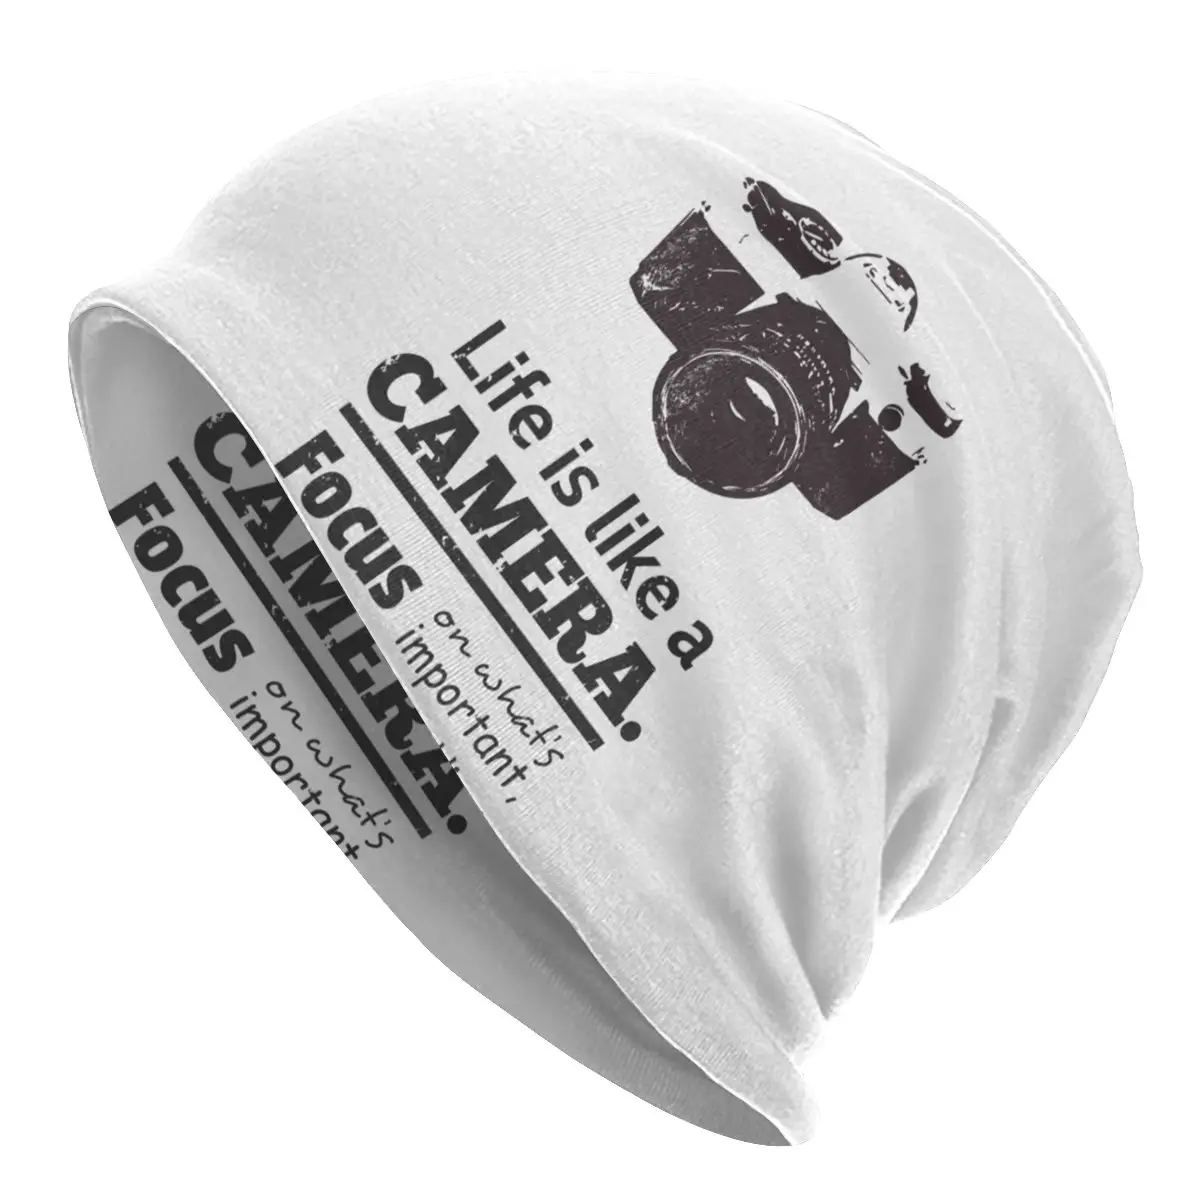 

Chic Life Is Like A Camera Skullies Beanies Photographer Hats Street Men Women Cap Adult Spring Dual-use Bonnet Knitted Hat